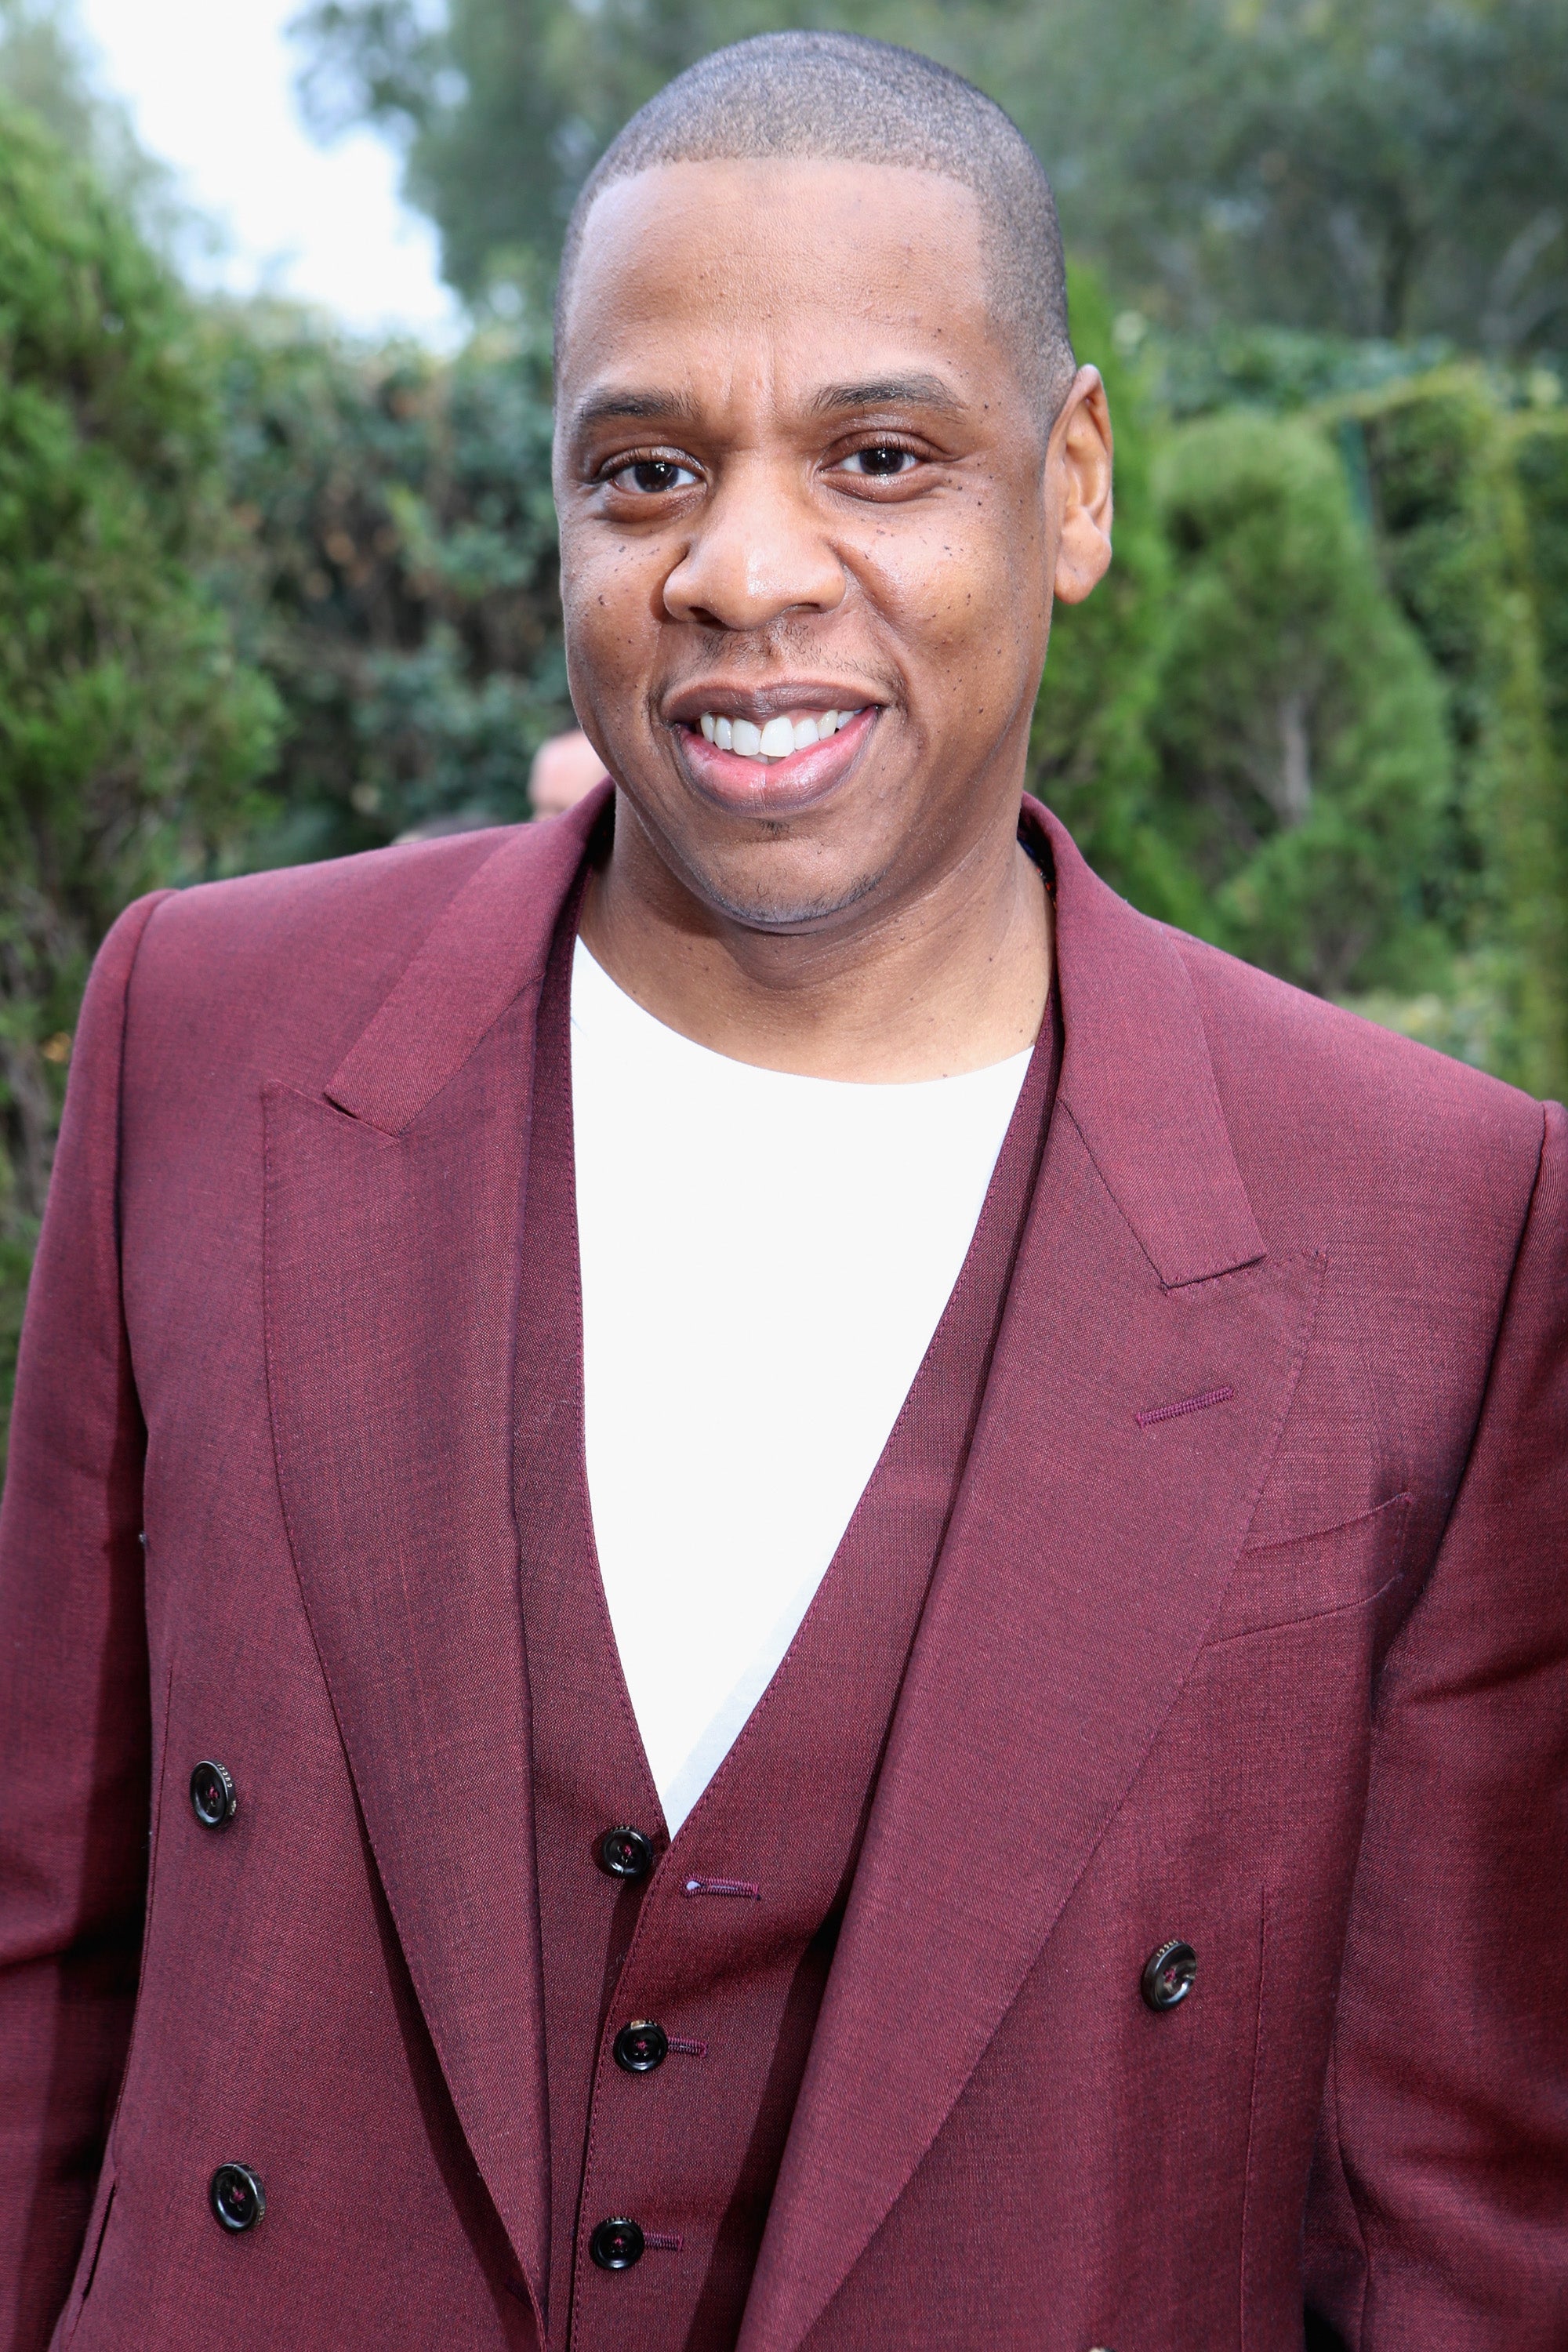 JAY-Z's Relationship With Solange Plus More Revealed From His First '4:44' Interview
